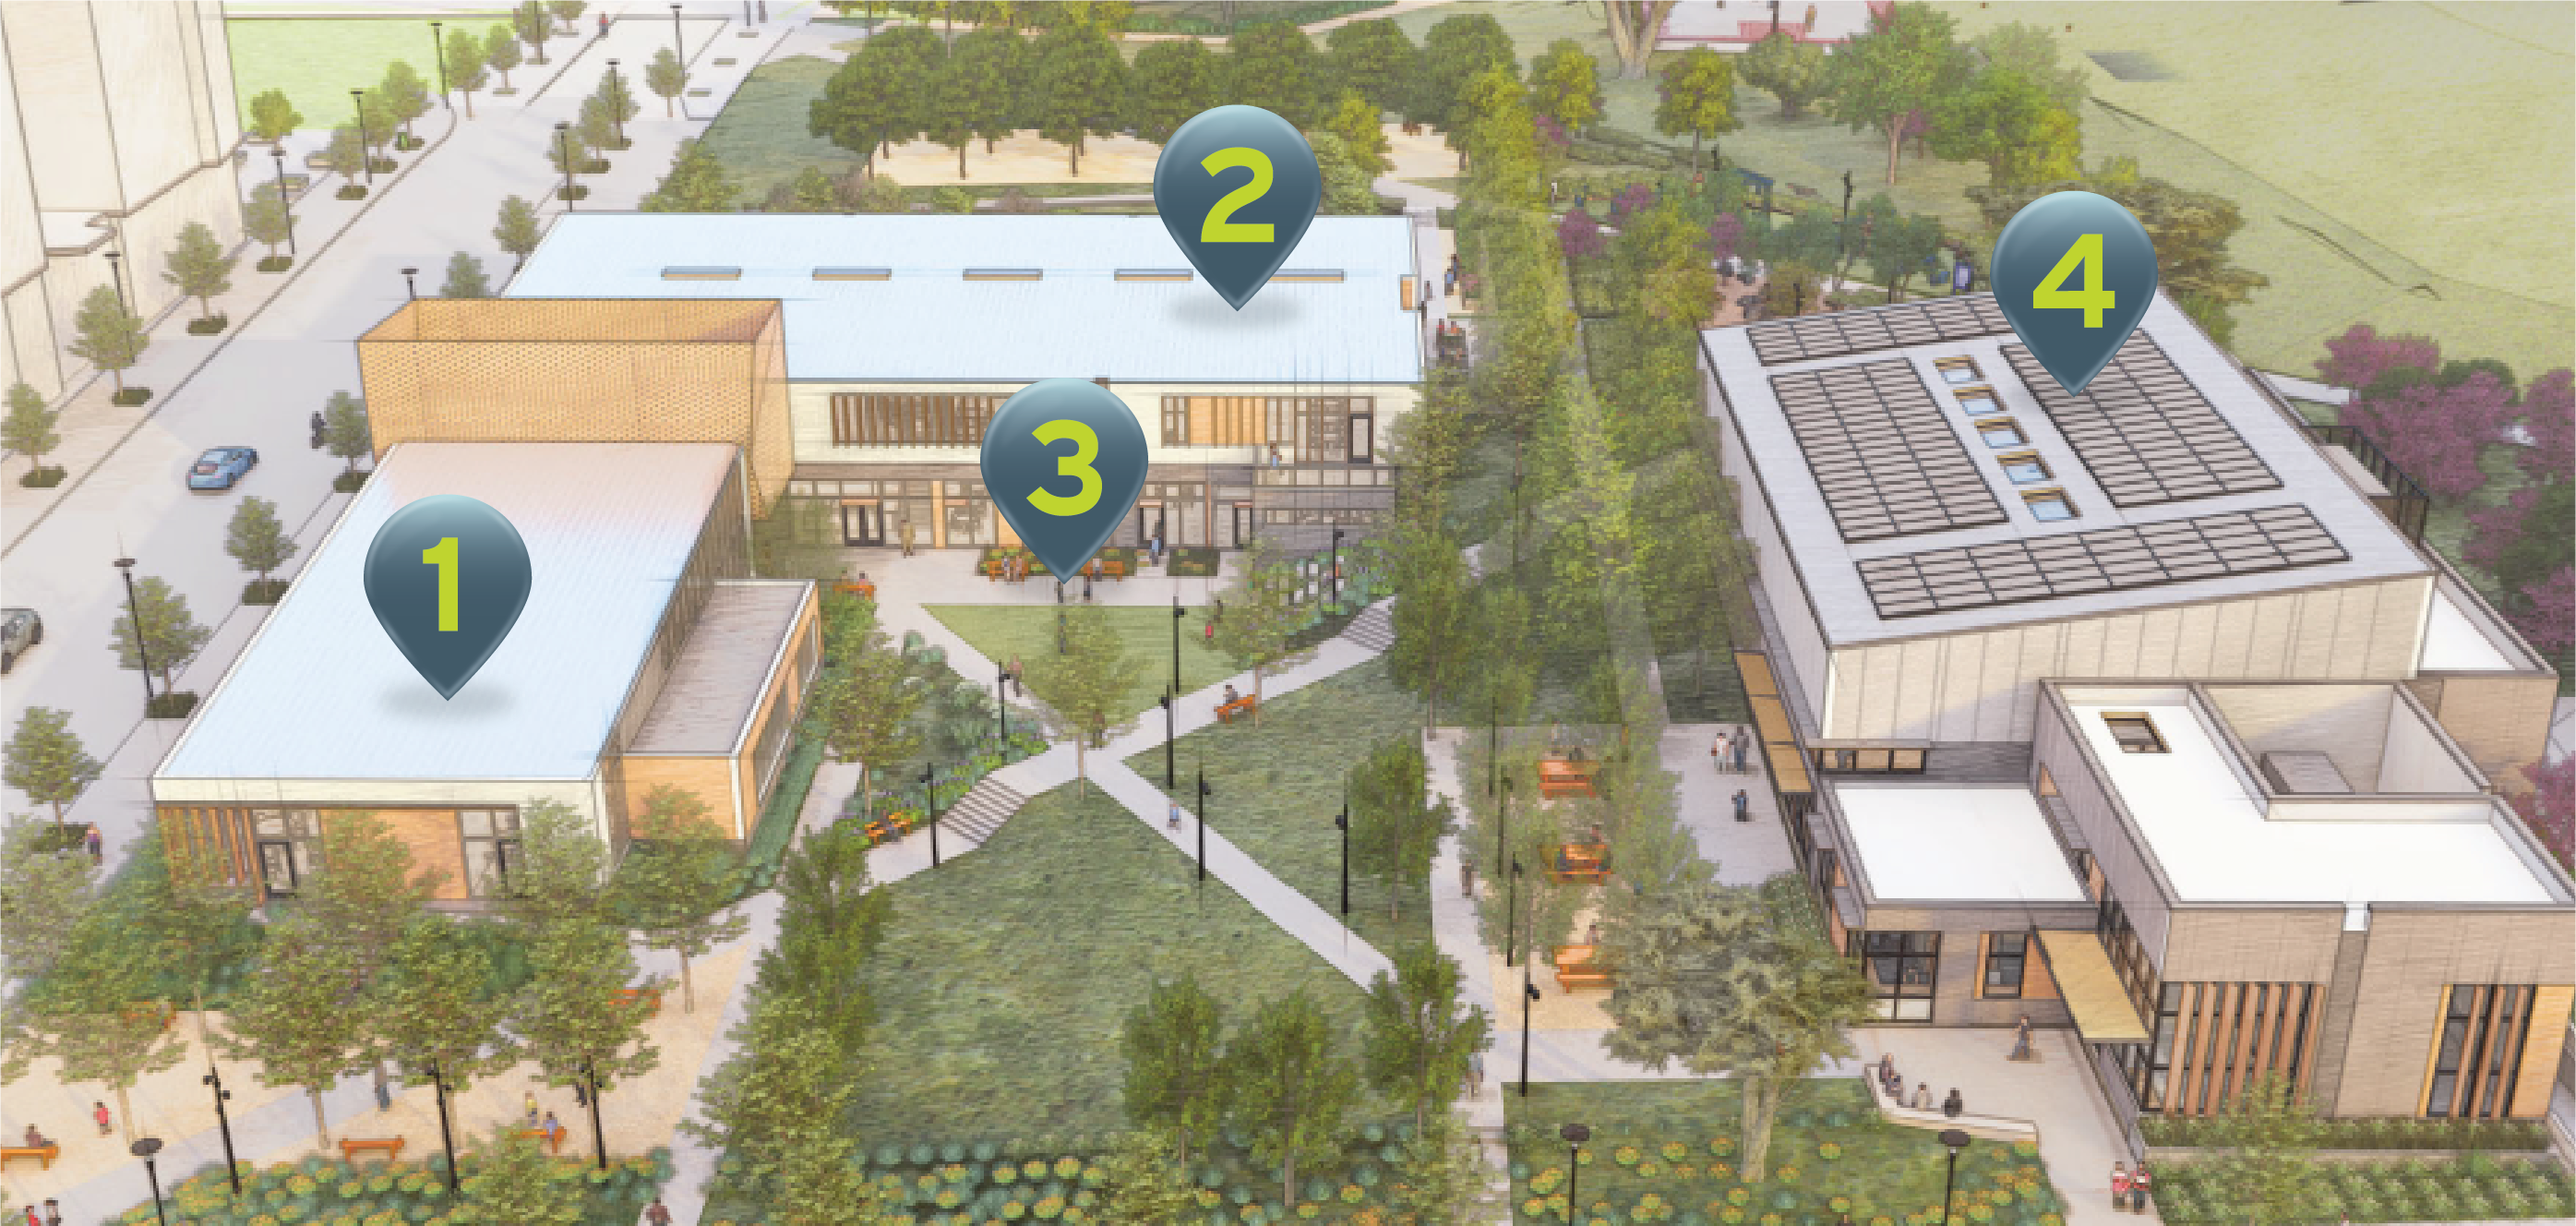 A bird's eye view rendering of the Sunnydale Hub, with markers 1, 2, 3, and 4